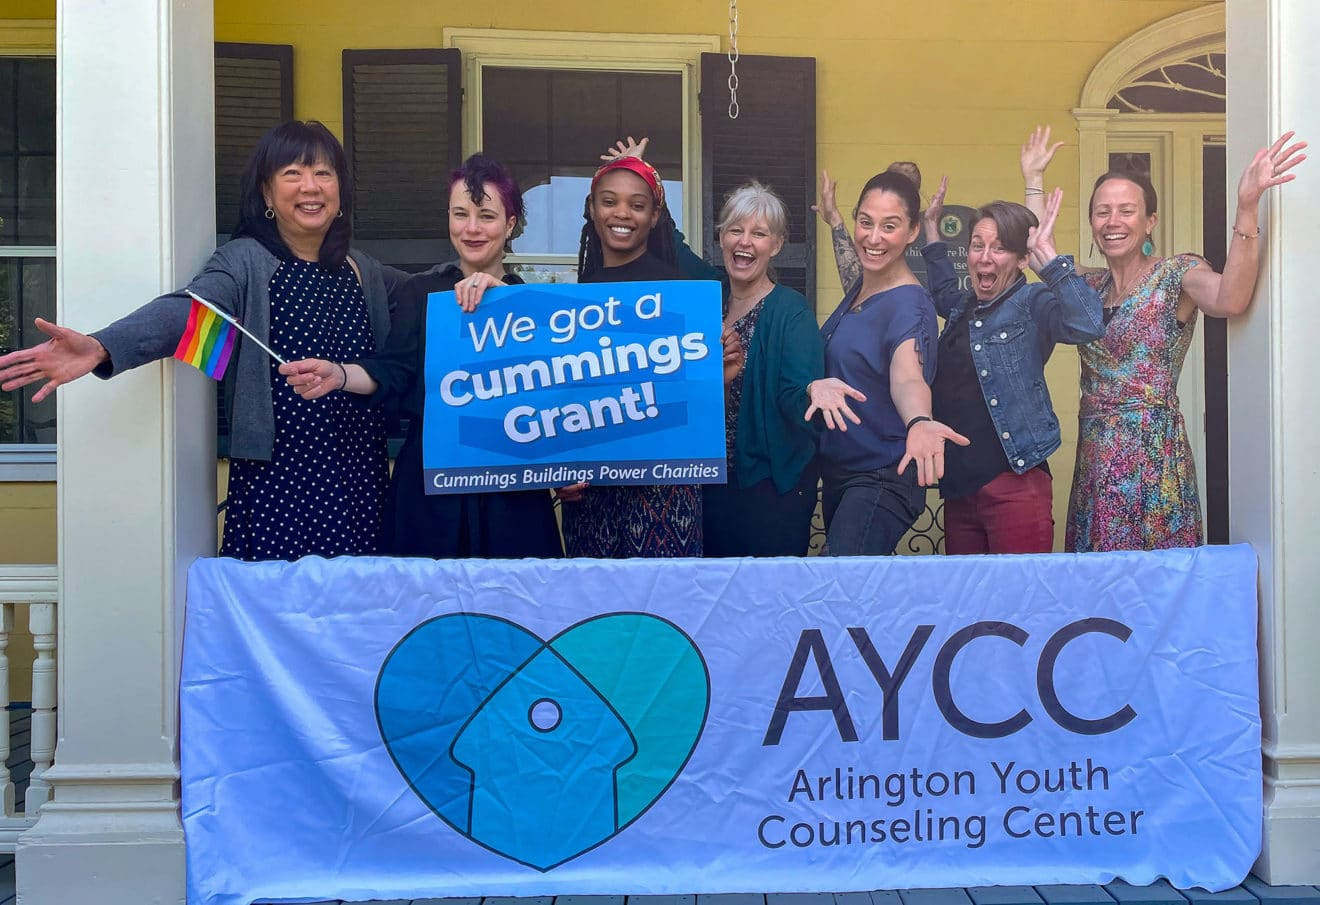 Staff members at the Arlington Youth Counseling Center celebrate earning a $500,000, 10-year grant from the Cummings Foundation that will help support their ongoing work for the next 10 years. (Photo Courtesy Arlington Youth Counseling Center)